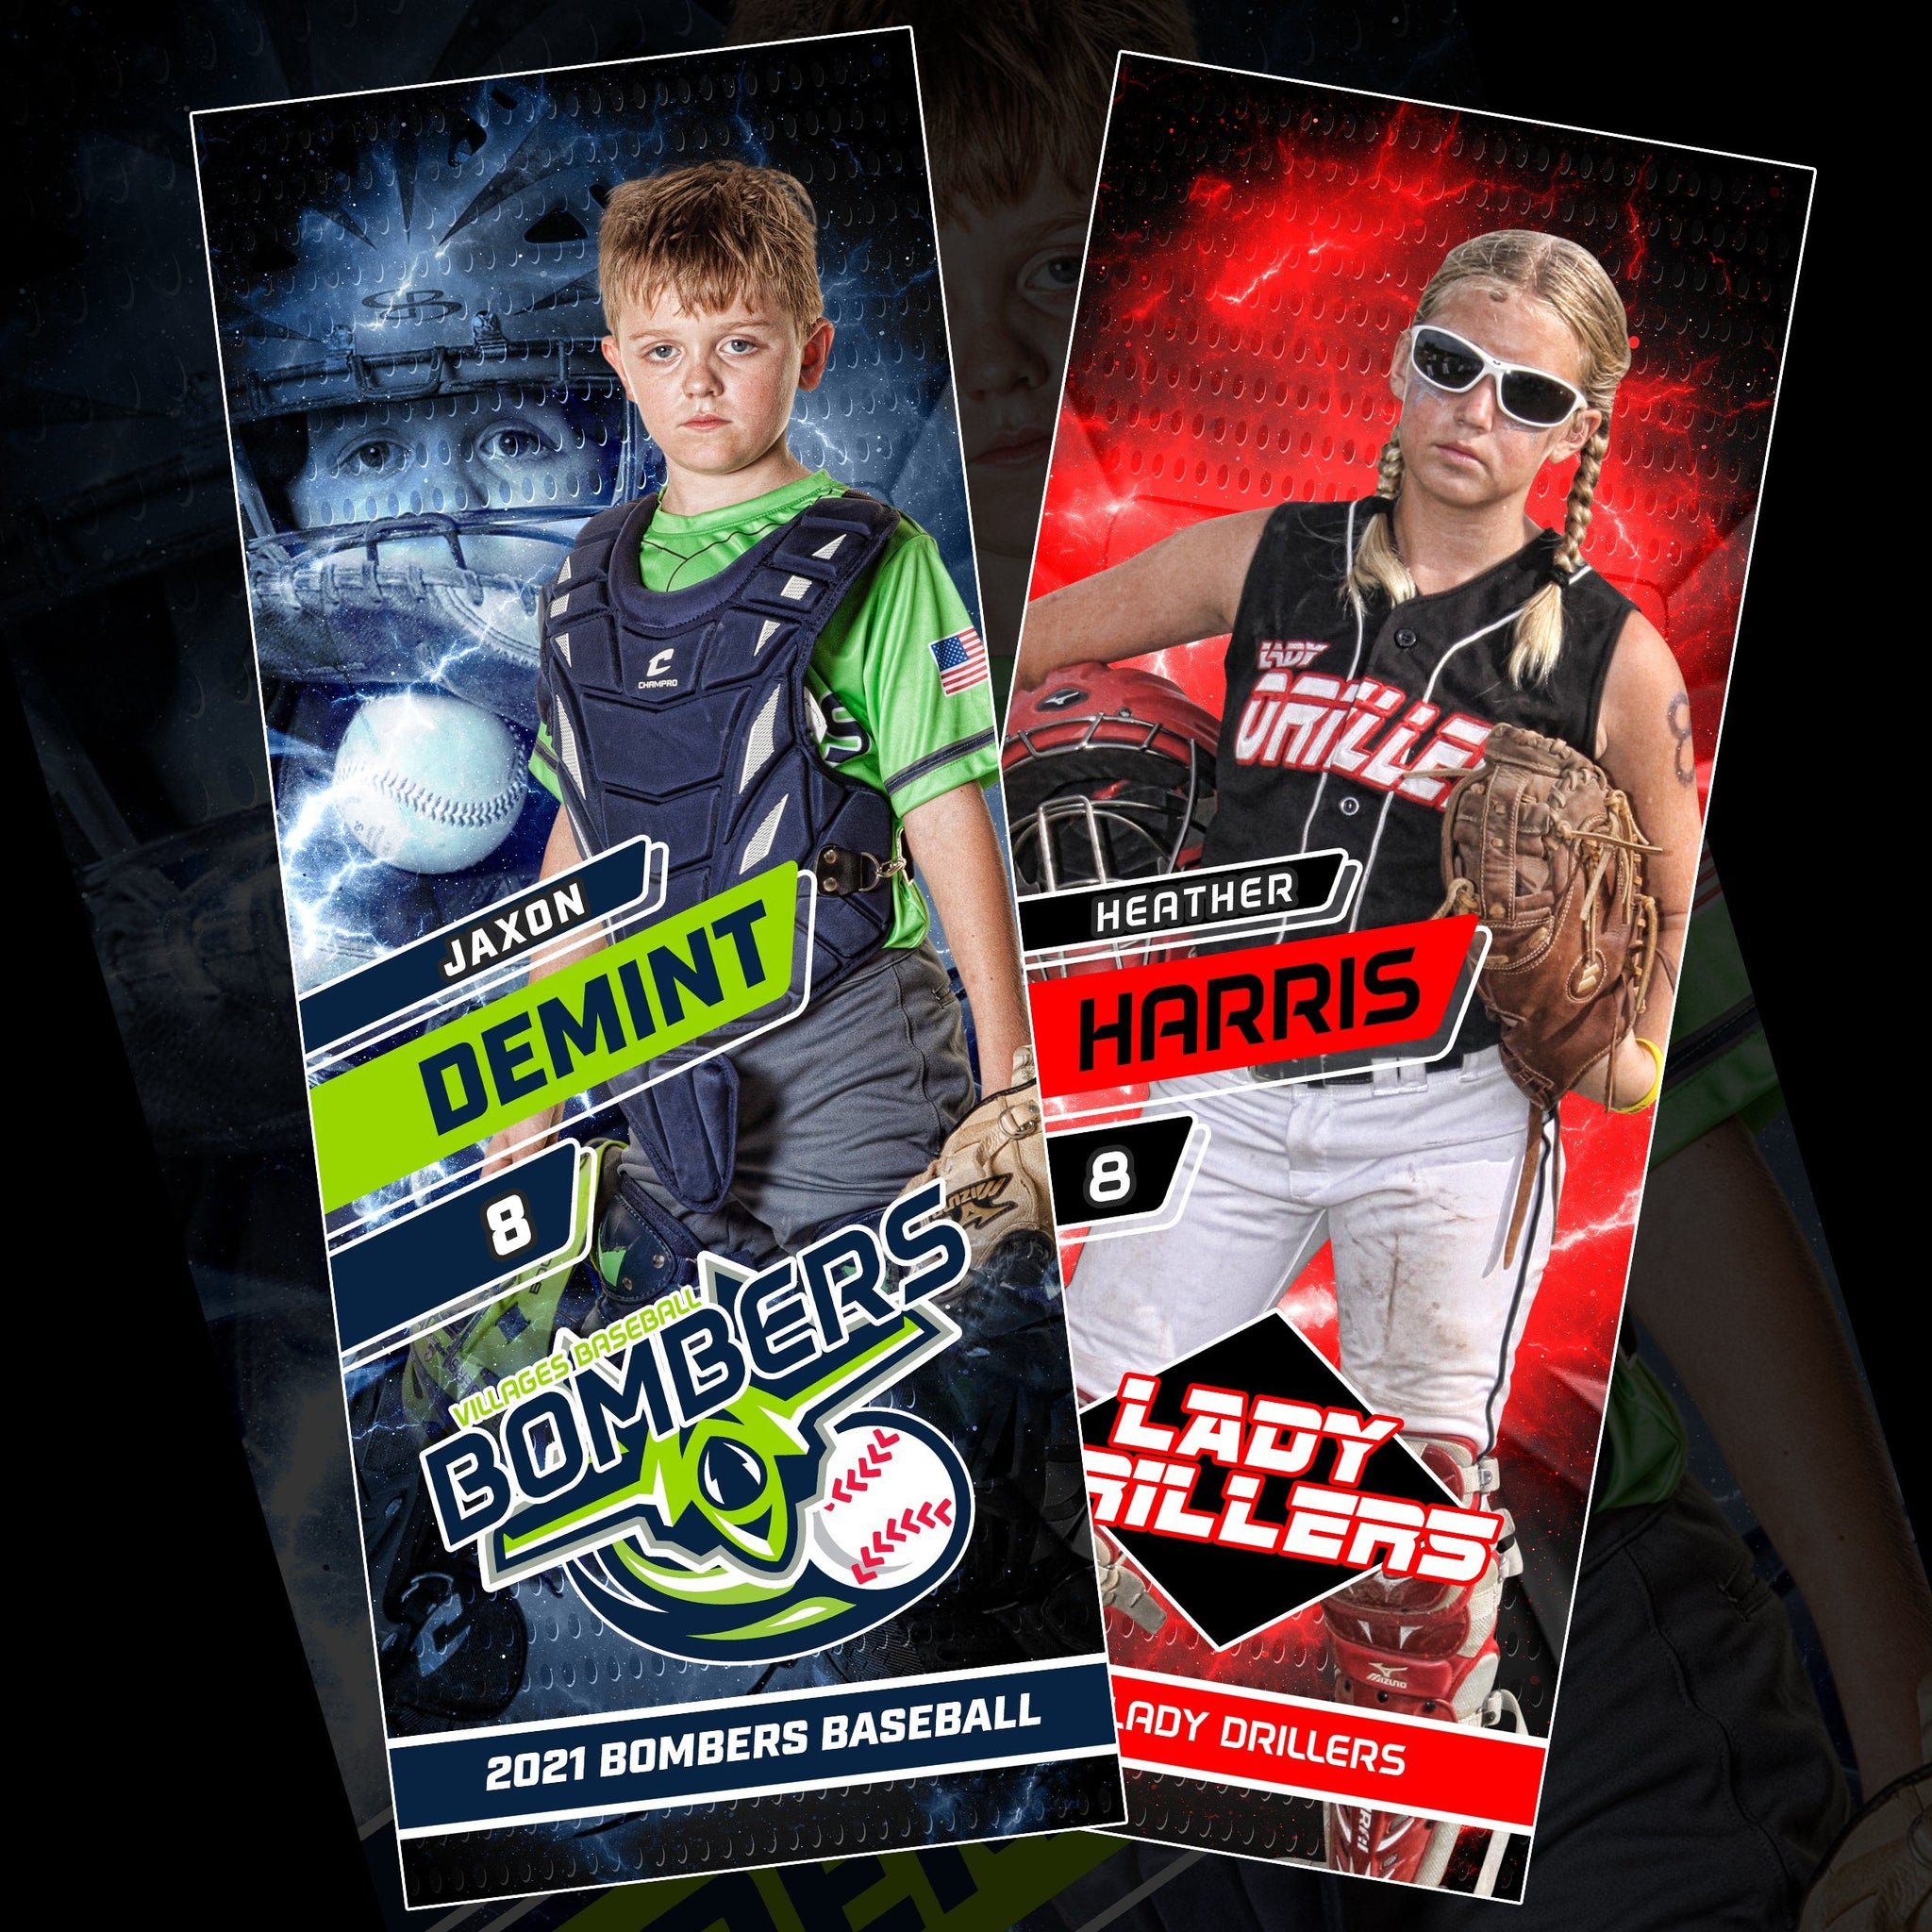 Bomber - Cinema Series Player Wall/Locker Banner & Poster Template-Photoshop Template - PSMGraphix